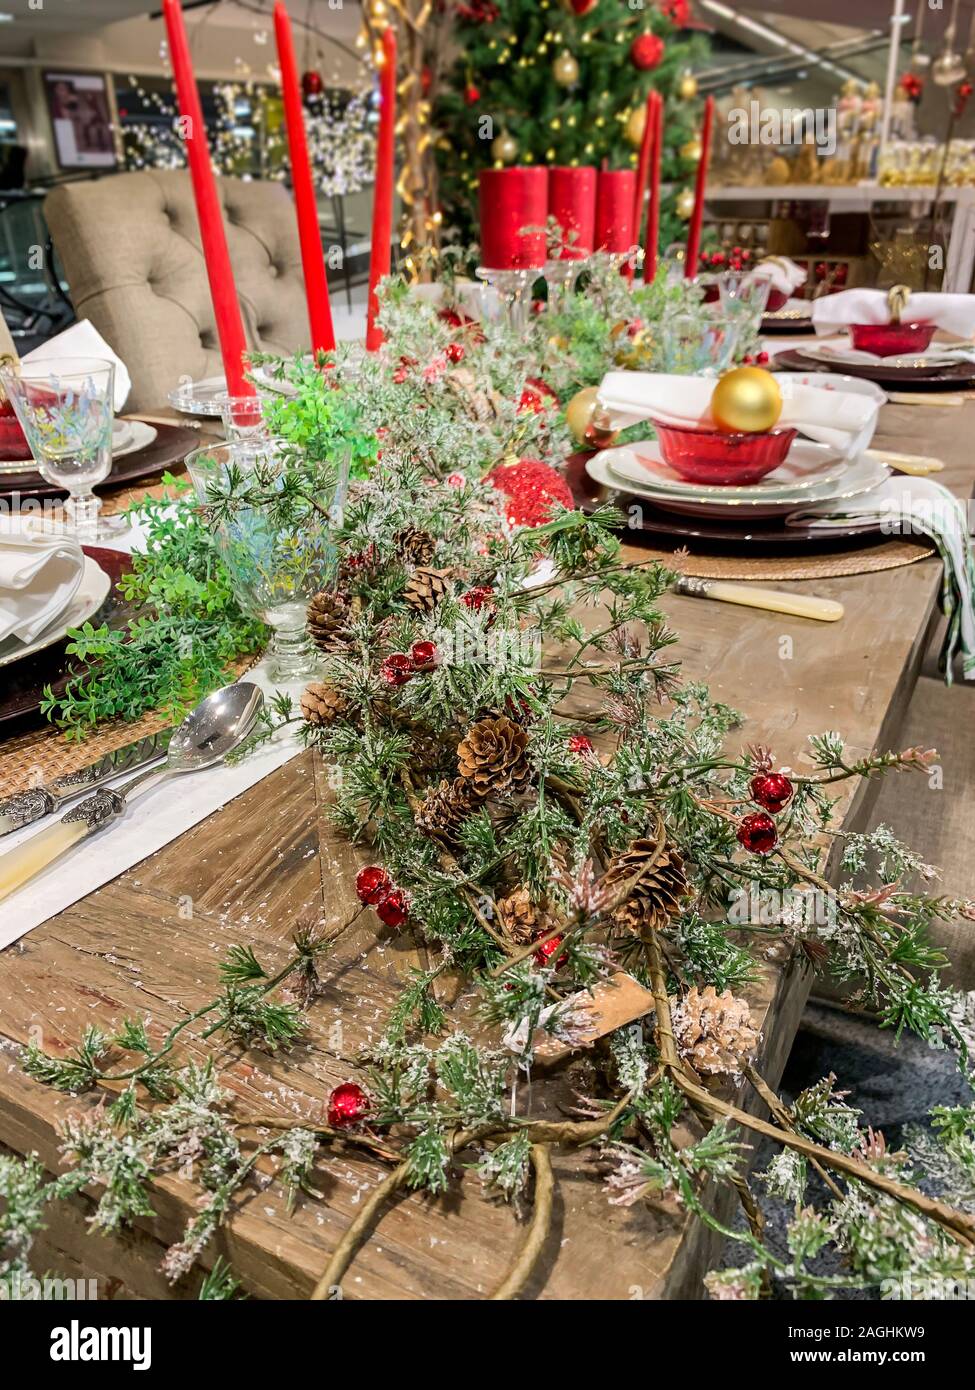 Elegant Christmas dinner table decoration, with dishes, glasses and ...